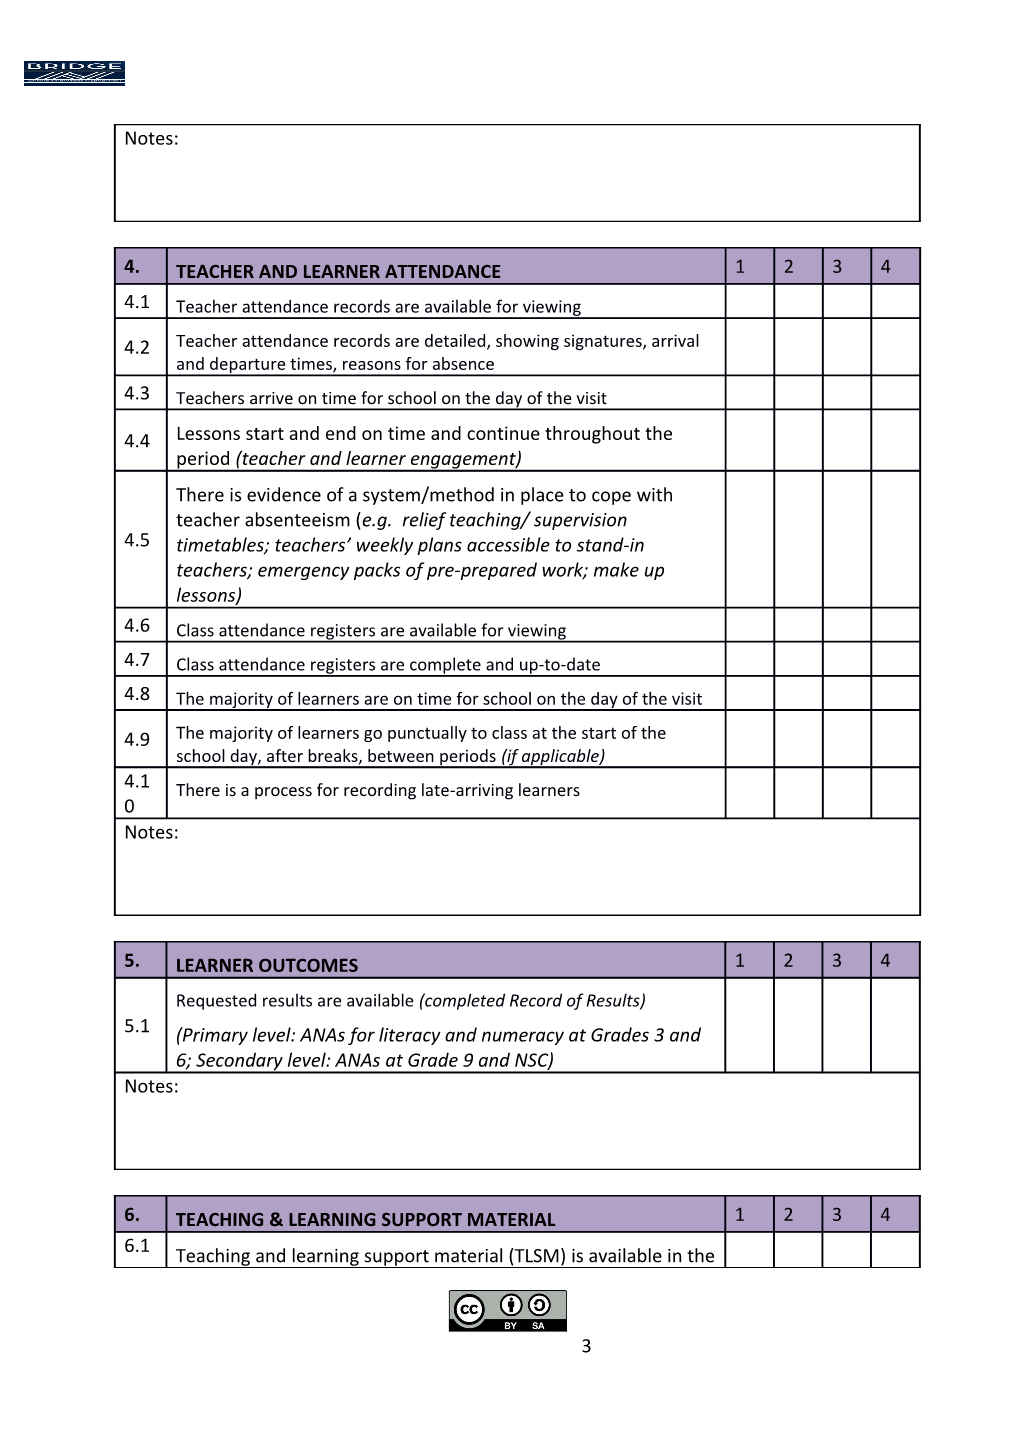 Use This Checklist to Record Your Observations While Walking About the School, Viewing